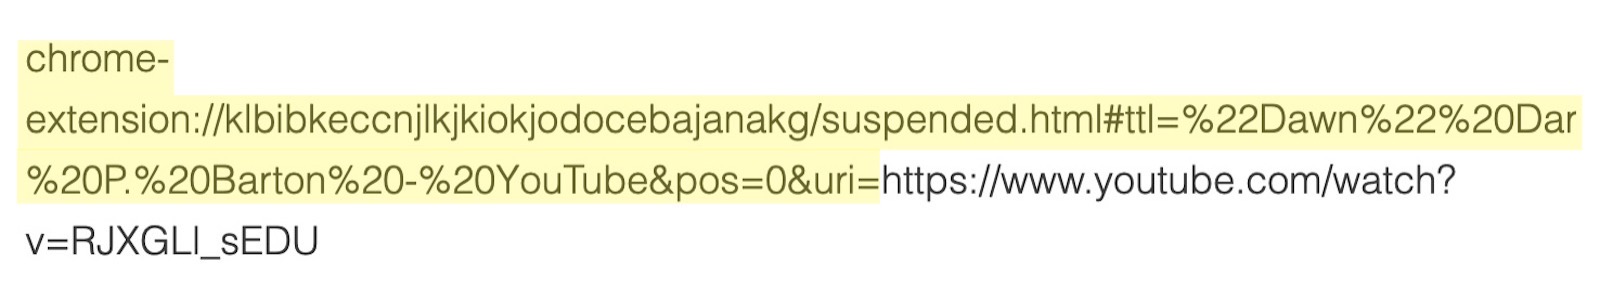 how-to-bring-back-suspended-tabs.jpg